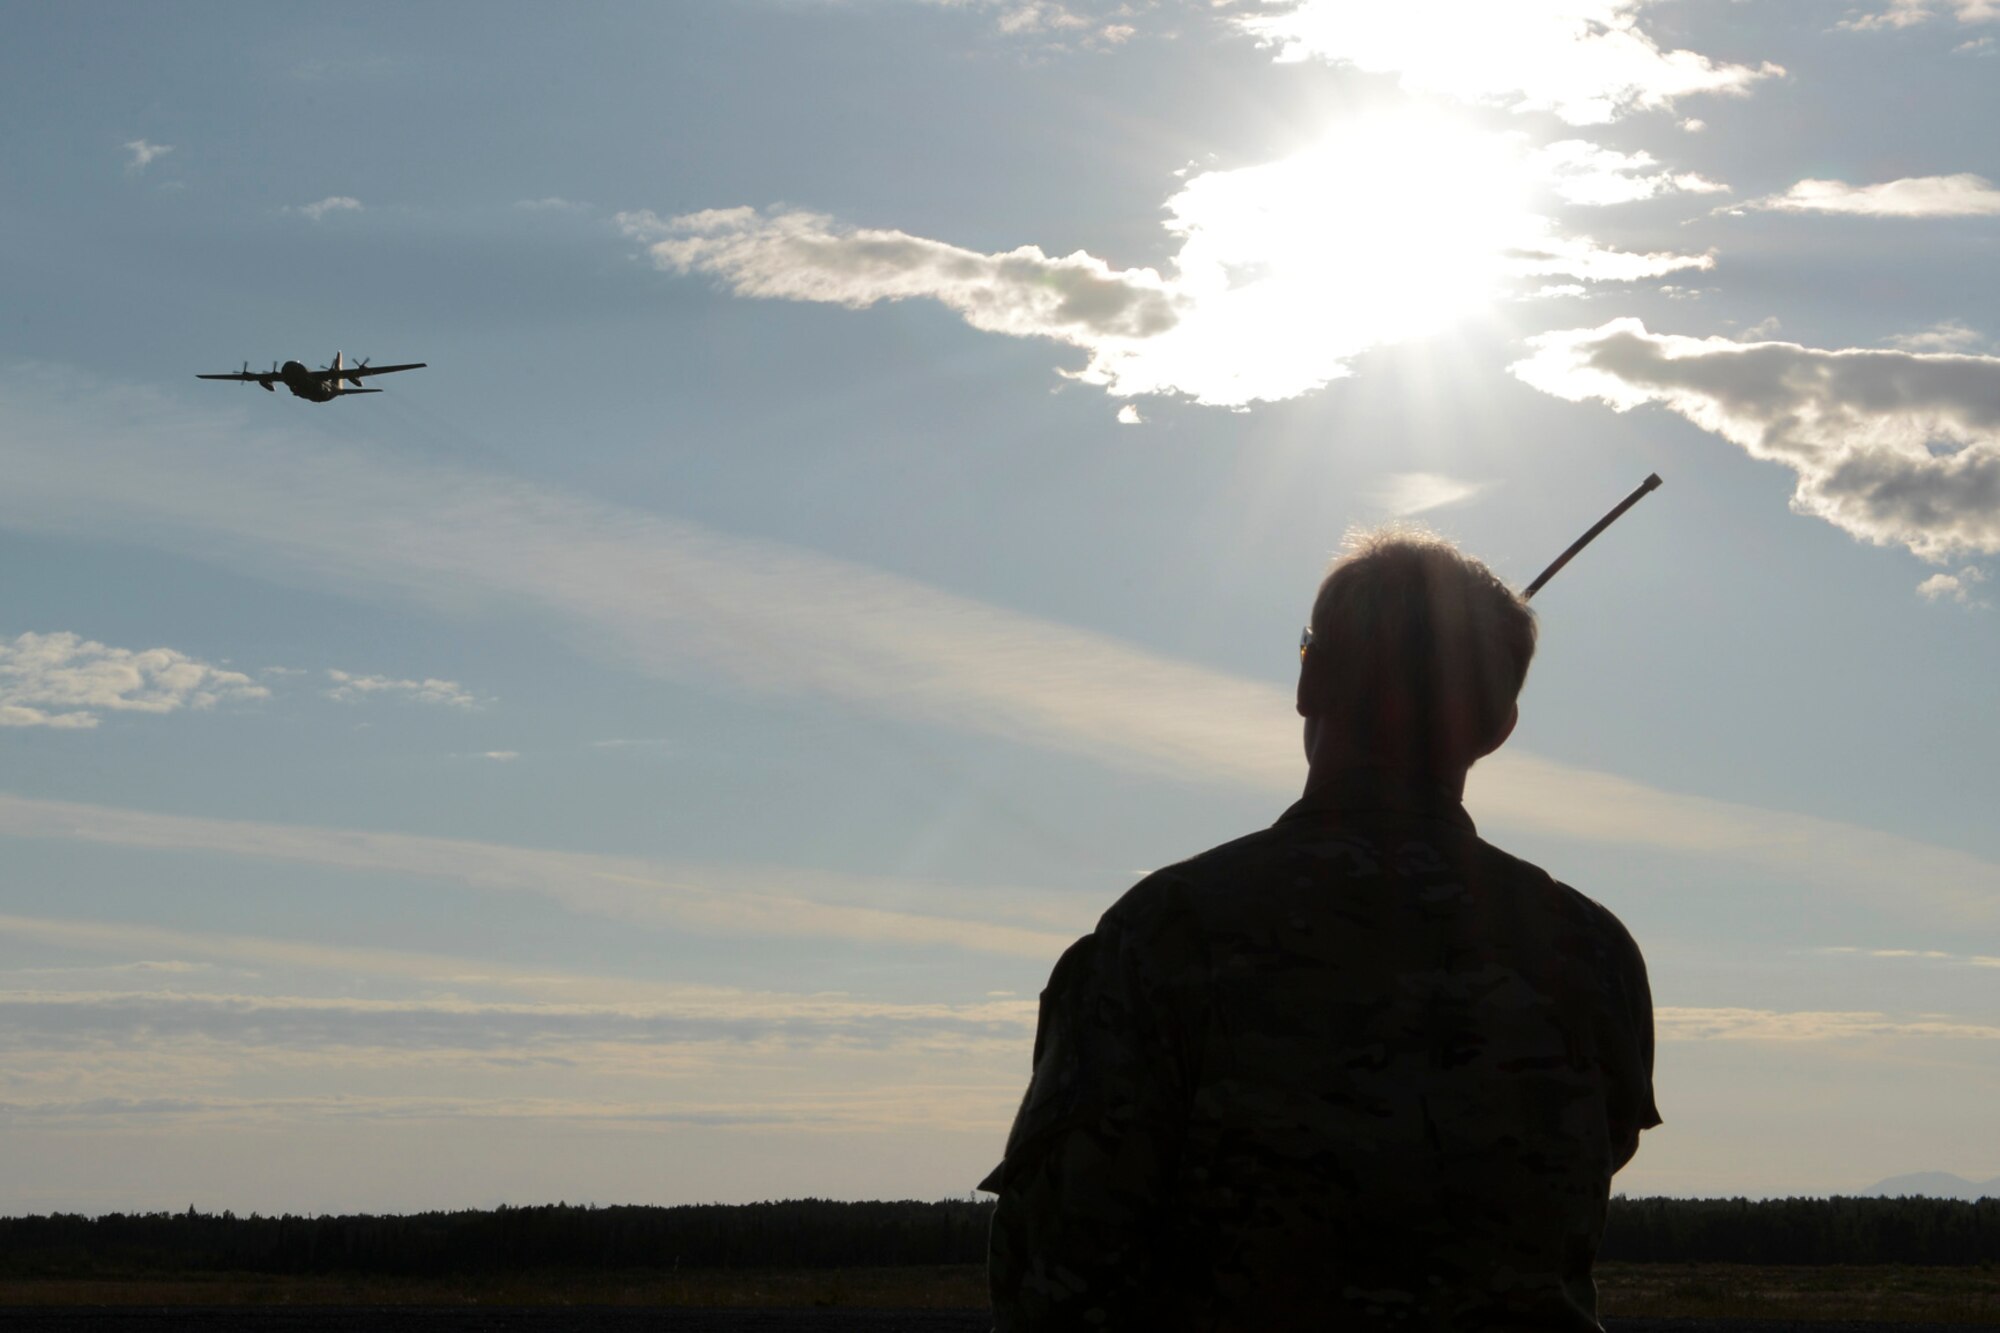 U.S. Air Force Capt. Michael Spanogle, 3rd Air Support Operations Squadron air mobility liaison officer, communicates with aircrew flying overhead a landing zone during RED FLAG-Alaska at Joint Base Elmendorf-Richardson, Alaska, Aug. 14, 2015. The training allowed C-130 aircrew to practice austere landings and take offs, combat offloads and supply drops, but also allowed friendly competition between participating Air Forces: U.S. Air Force, Japan Air Self-Defense Force, Royal Air Force, Royal Australian Air Force, Royal New Zealand Air Force and Royal Thai Air Force. Seasoned C-130 aircrew from each country judged the training exercises from the ground, allotting points based off predetermined timing and accuracy requirements. (U.S. Air Force photo by Staff Sgt. Cody H. Ramirez/Released)